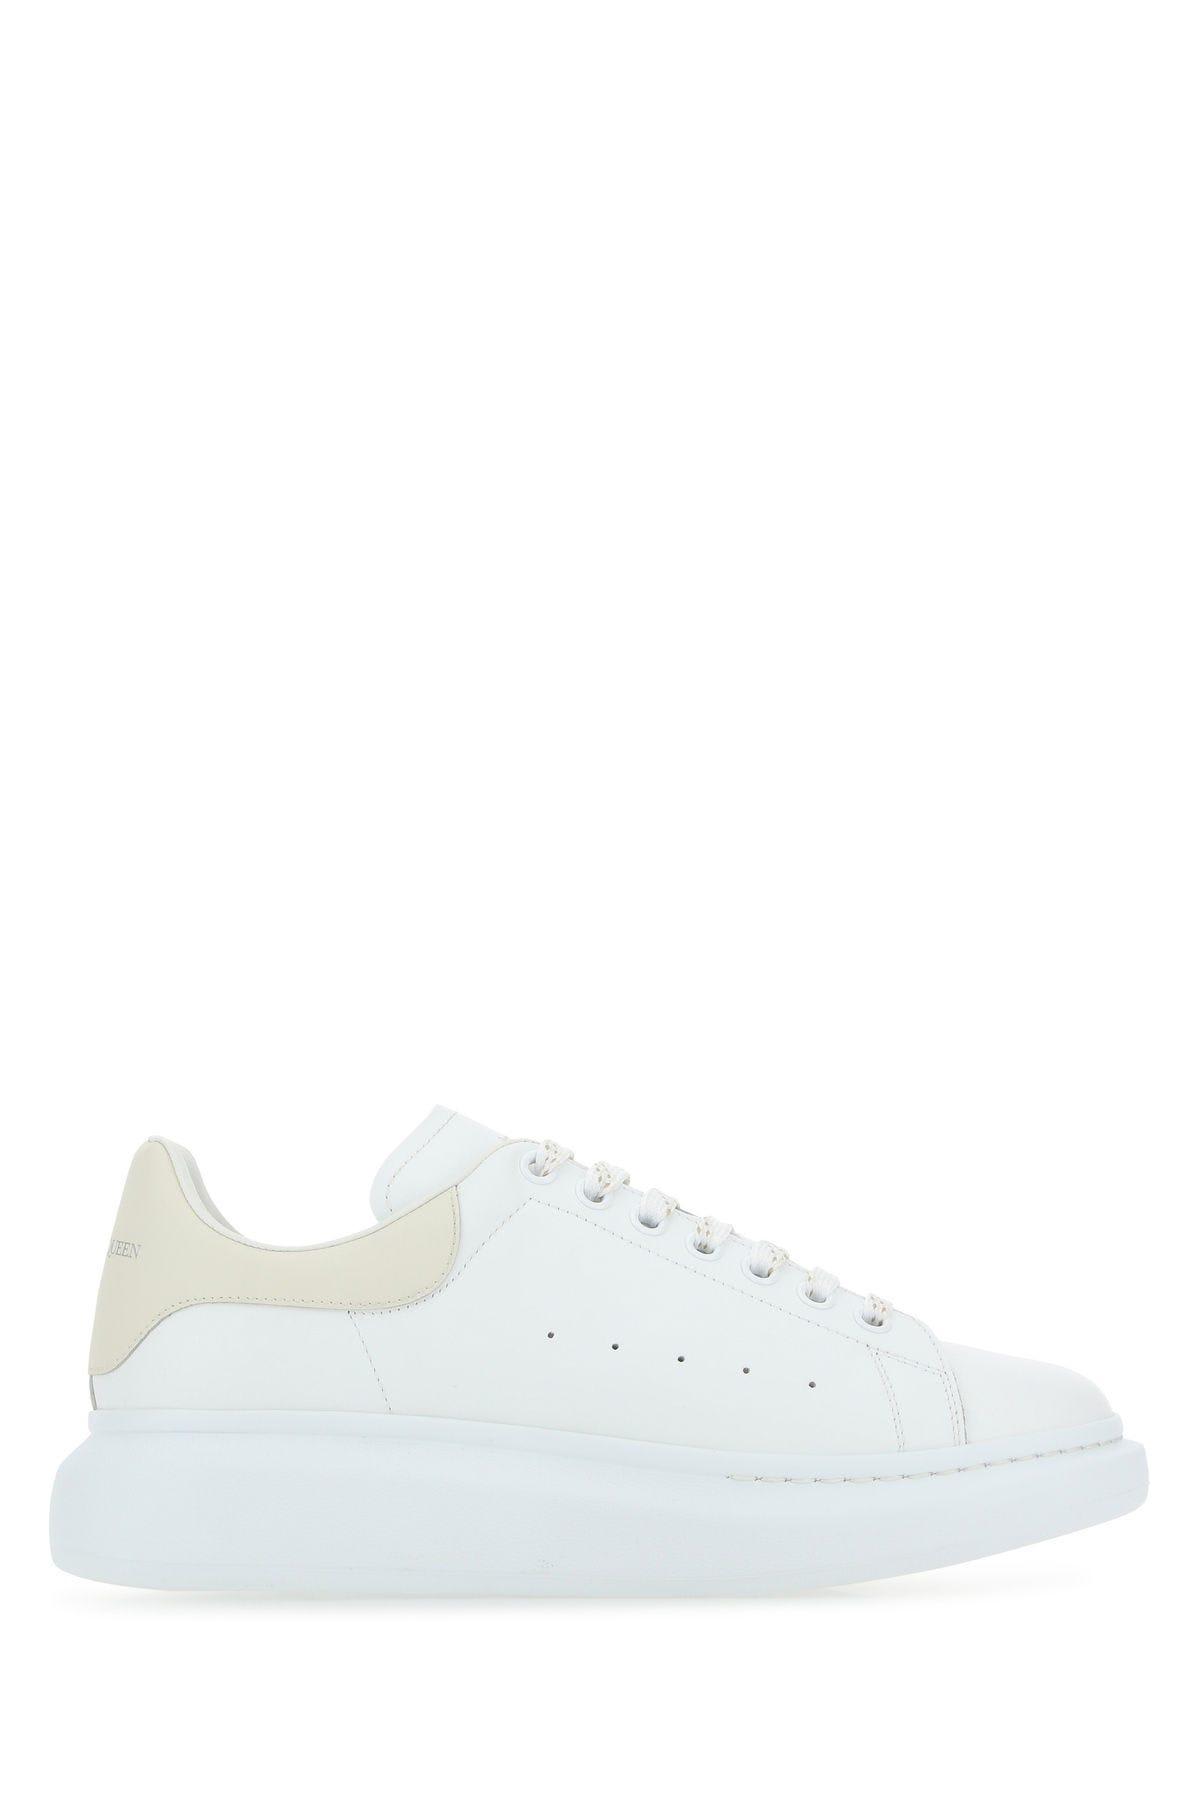 Alexander McQueen White Leather Sneakers With Sand Leather Heel